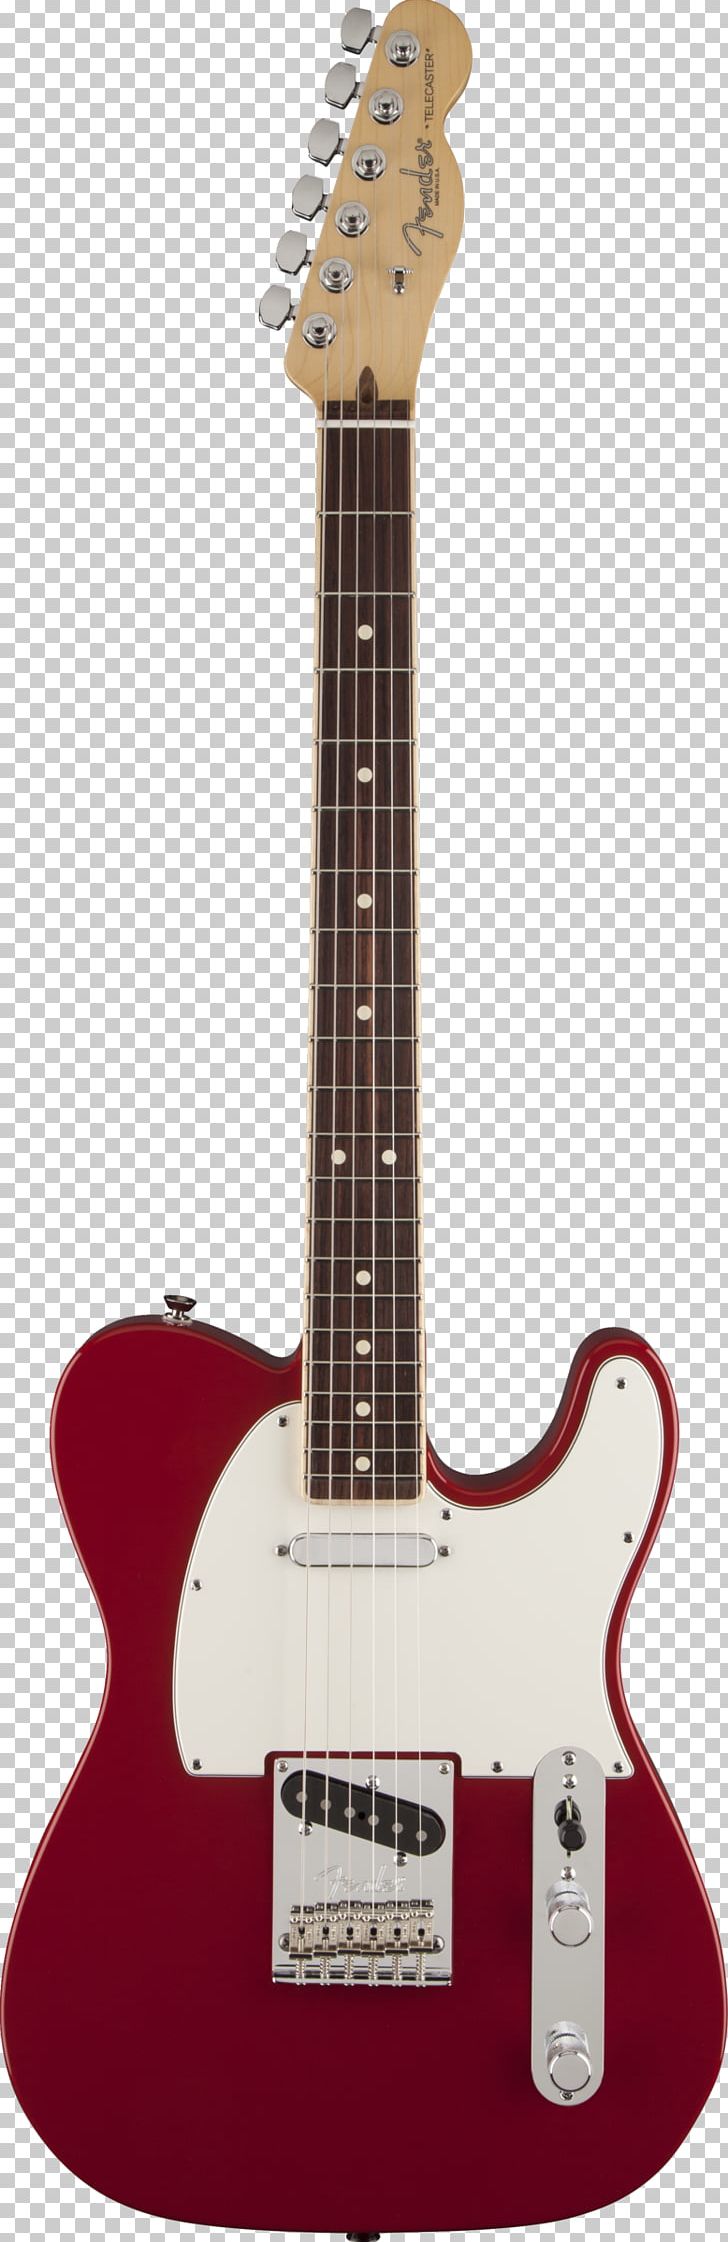 Fender Telecaster Fender Musical Instruments Corporation Electric Guitar Fender Stratocaster Squier PNG, Clipart, Acoustic Electric Guitar, Acoustic Guitar, Fender Telecaster Thinline, Fingerboard, Guitar Free PNG Download